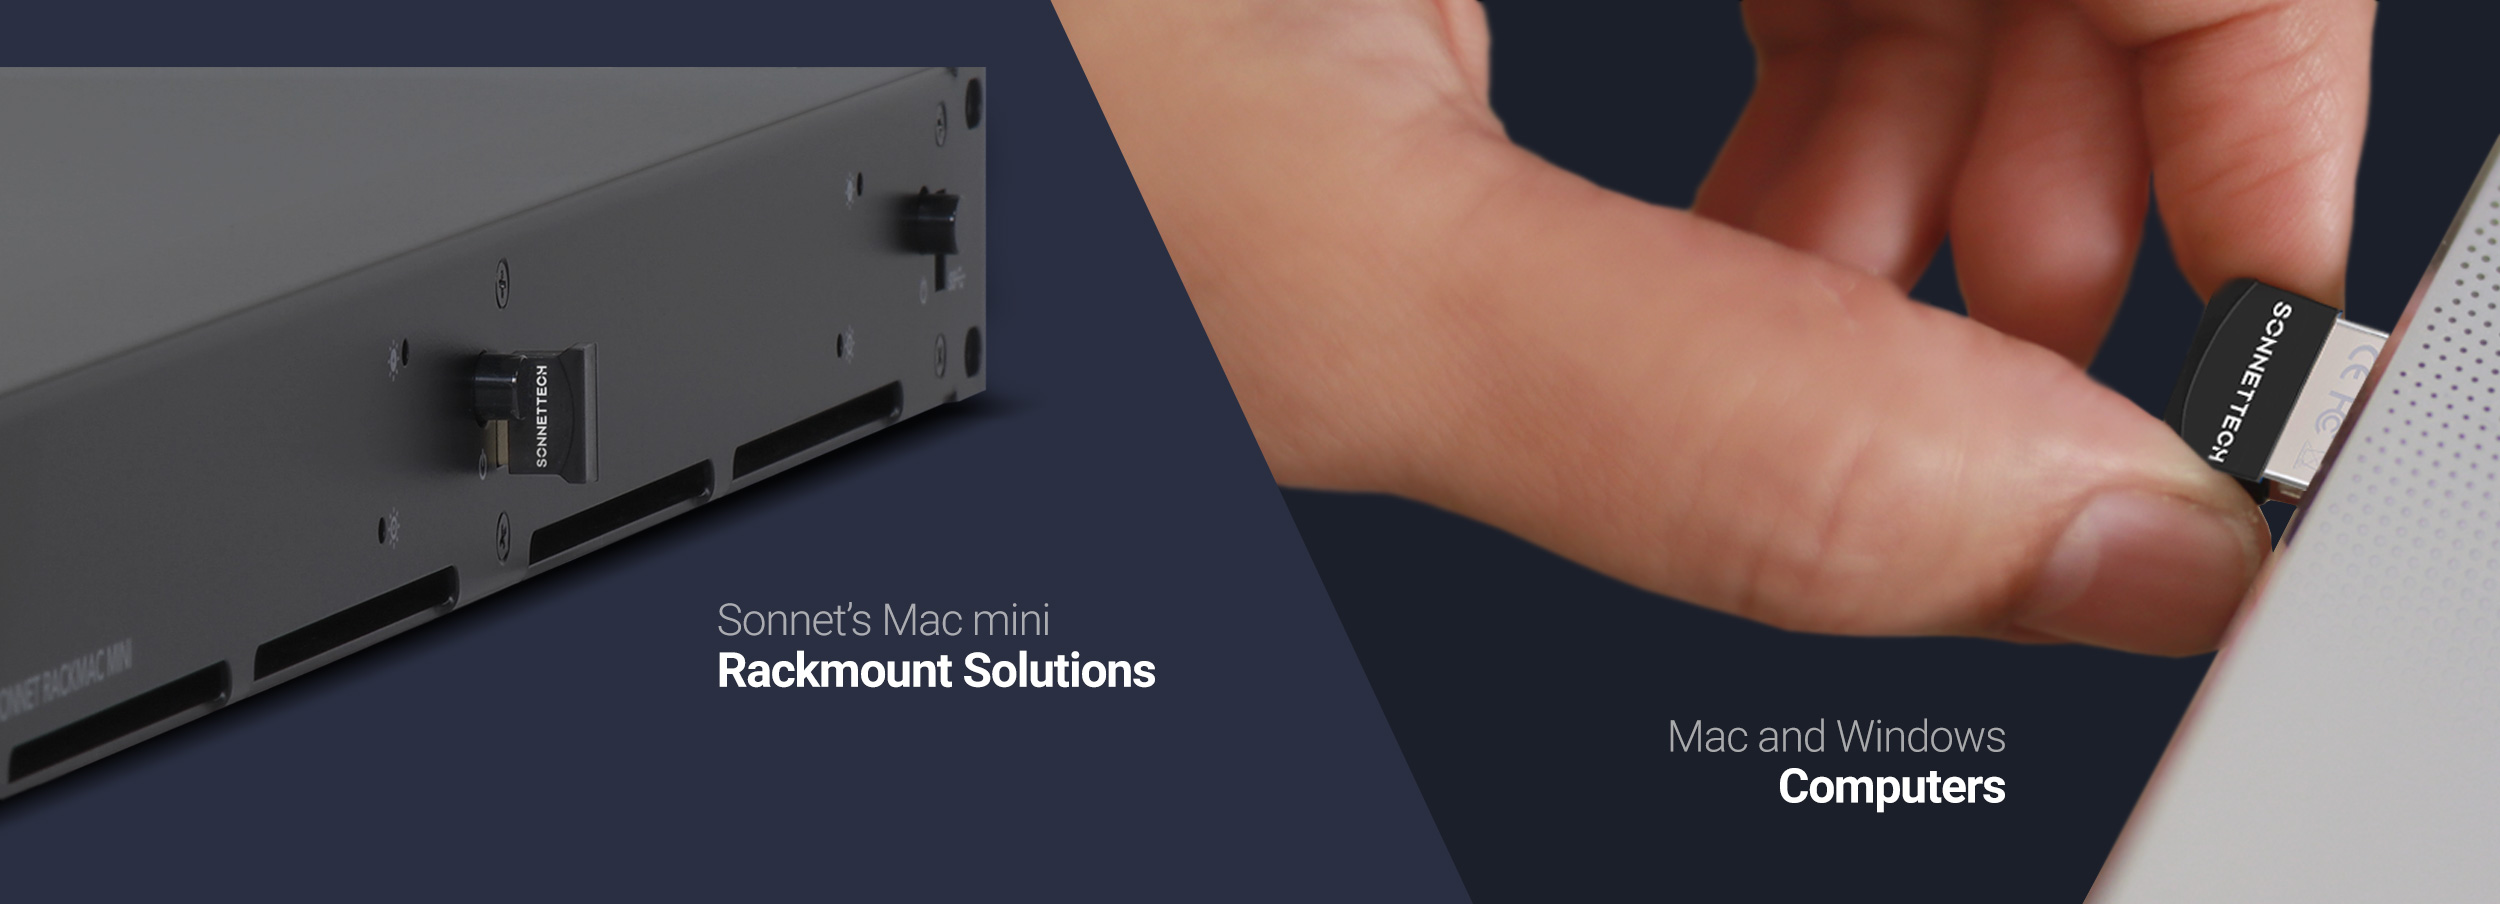 Works with Sonnet's Mac mini Rackmount Mounting Solutions and Supported Mac and Windows Computers